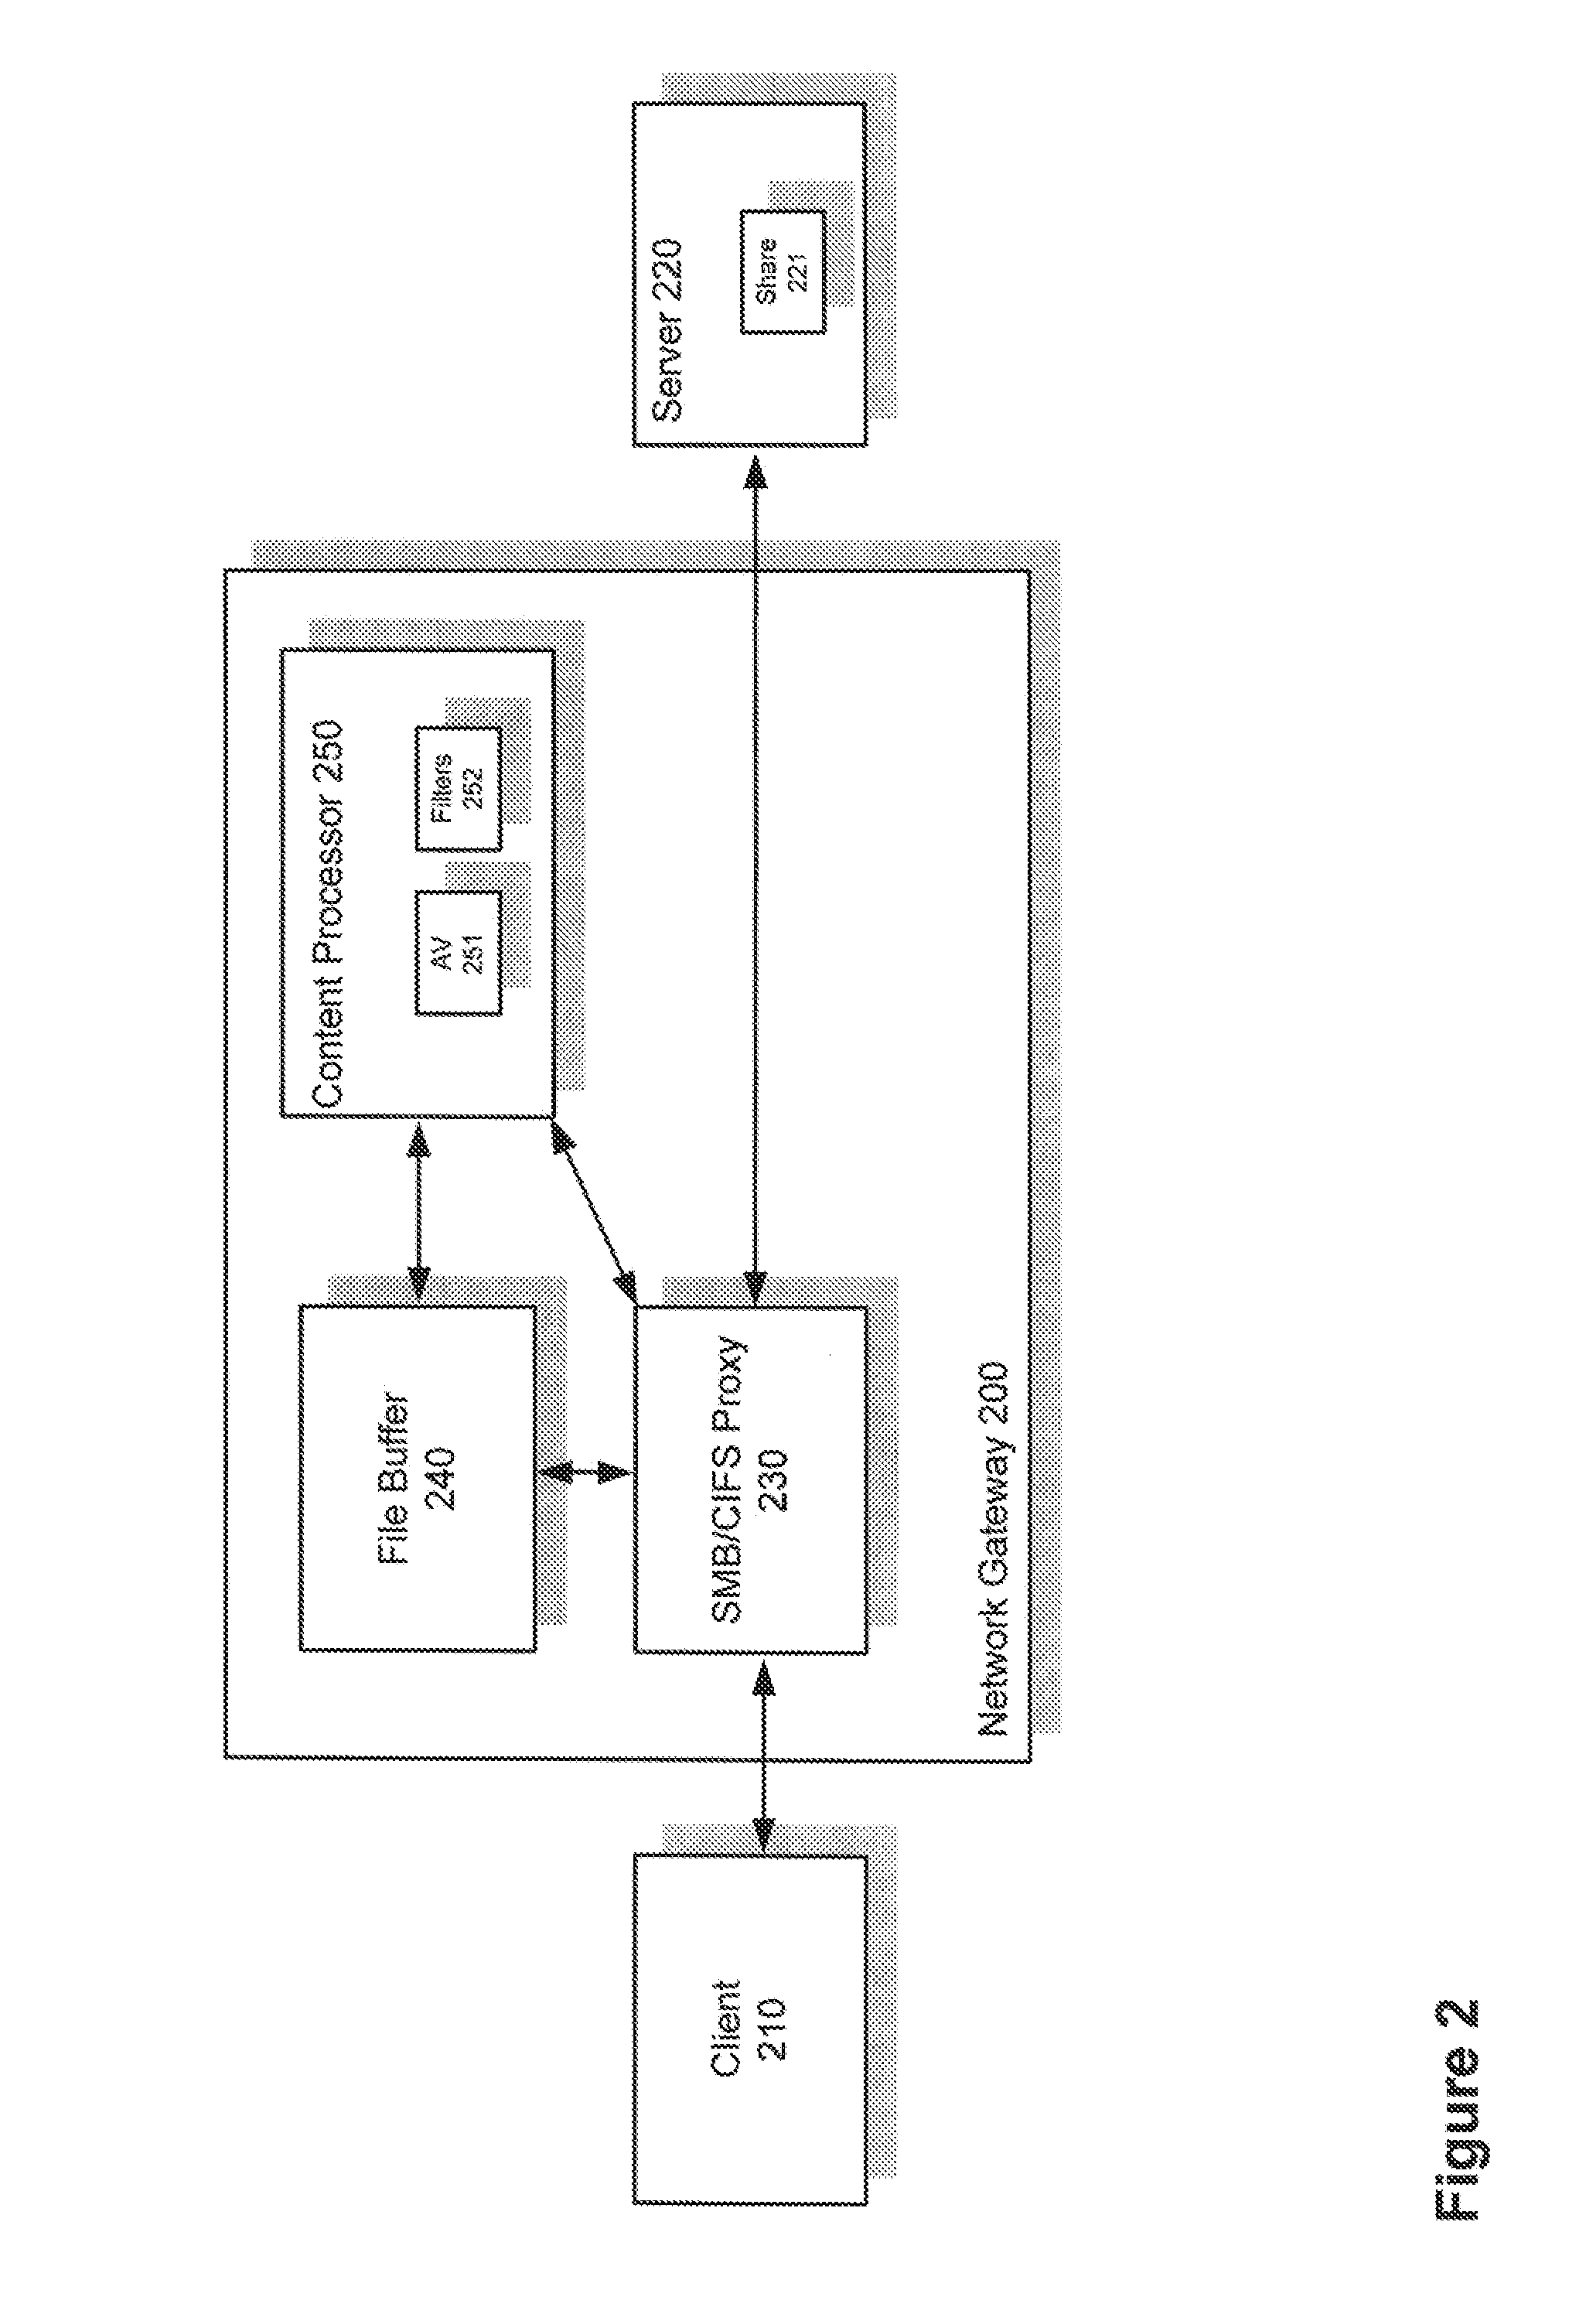 Content filtering of remote file-system access protocols